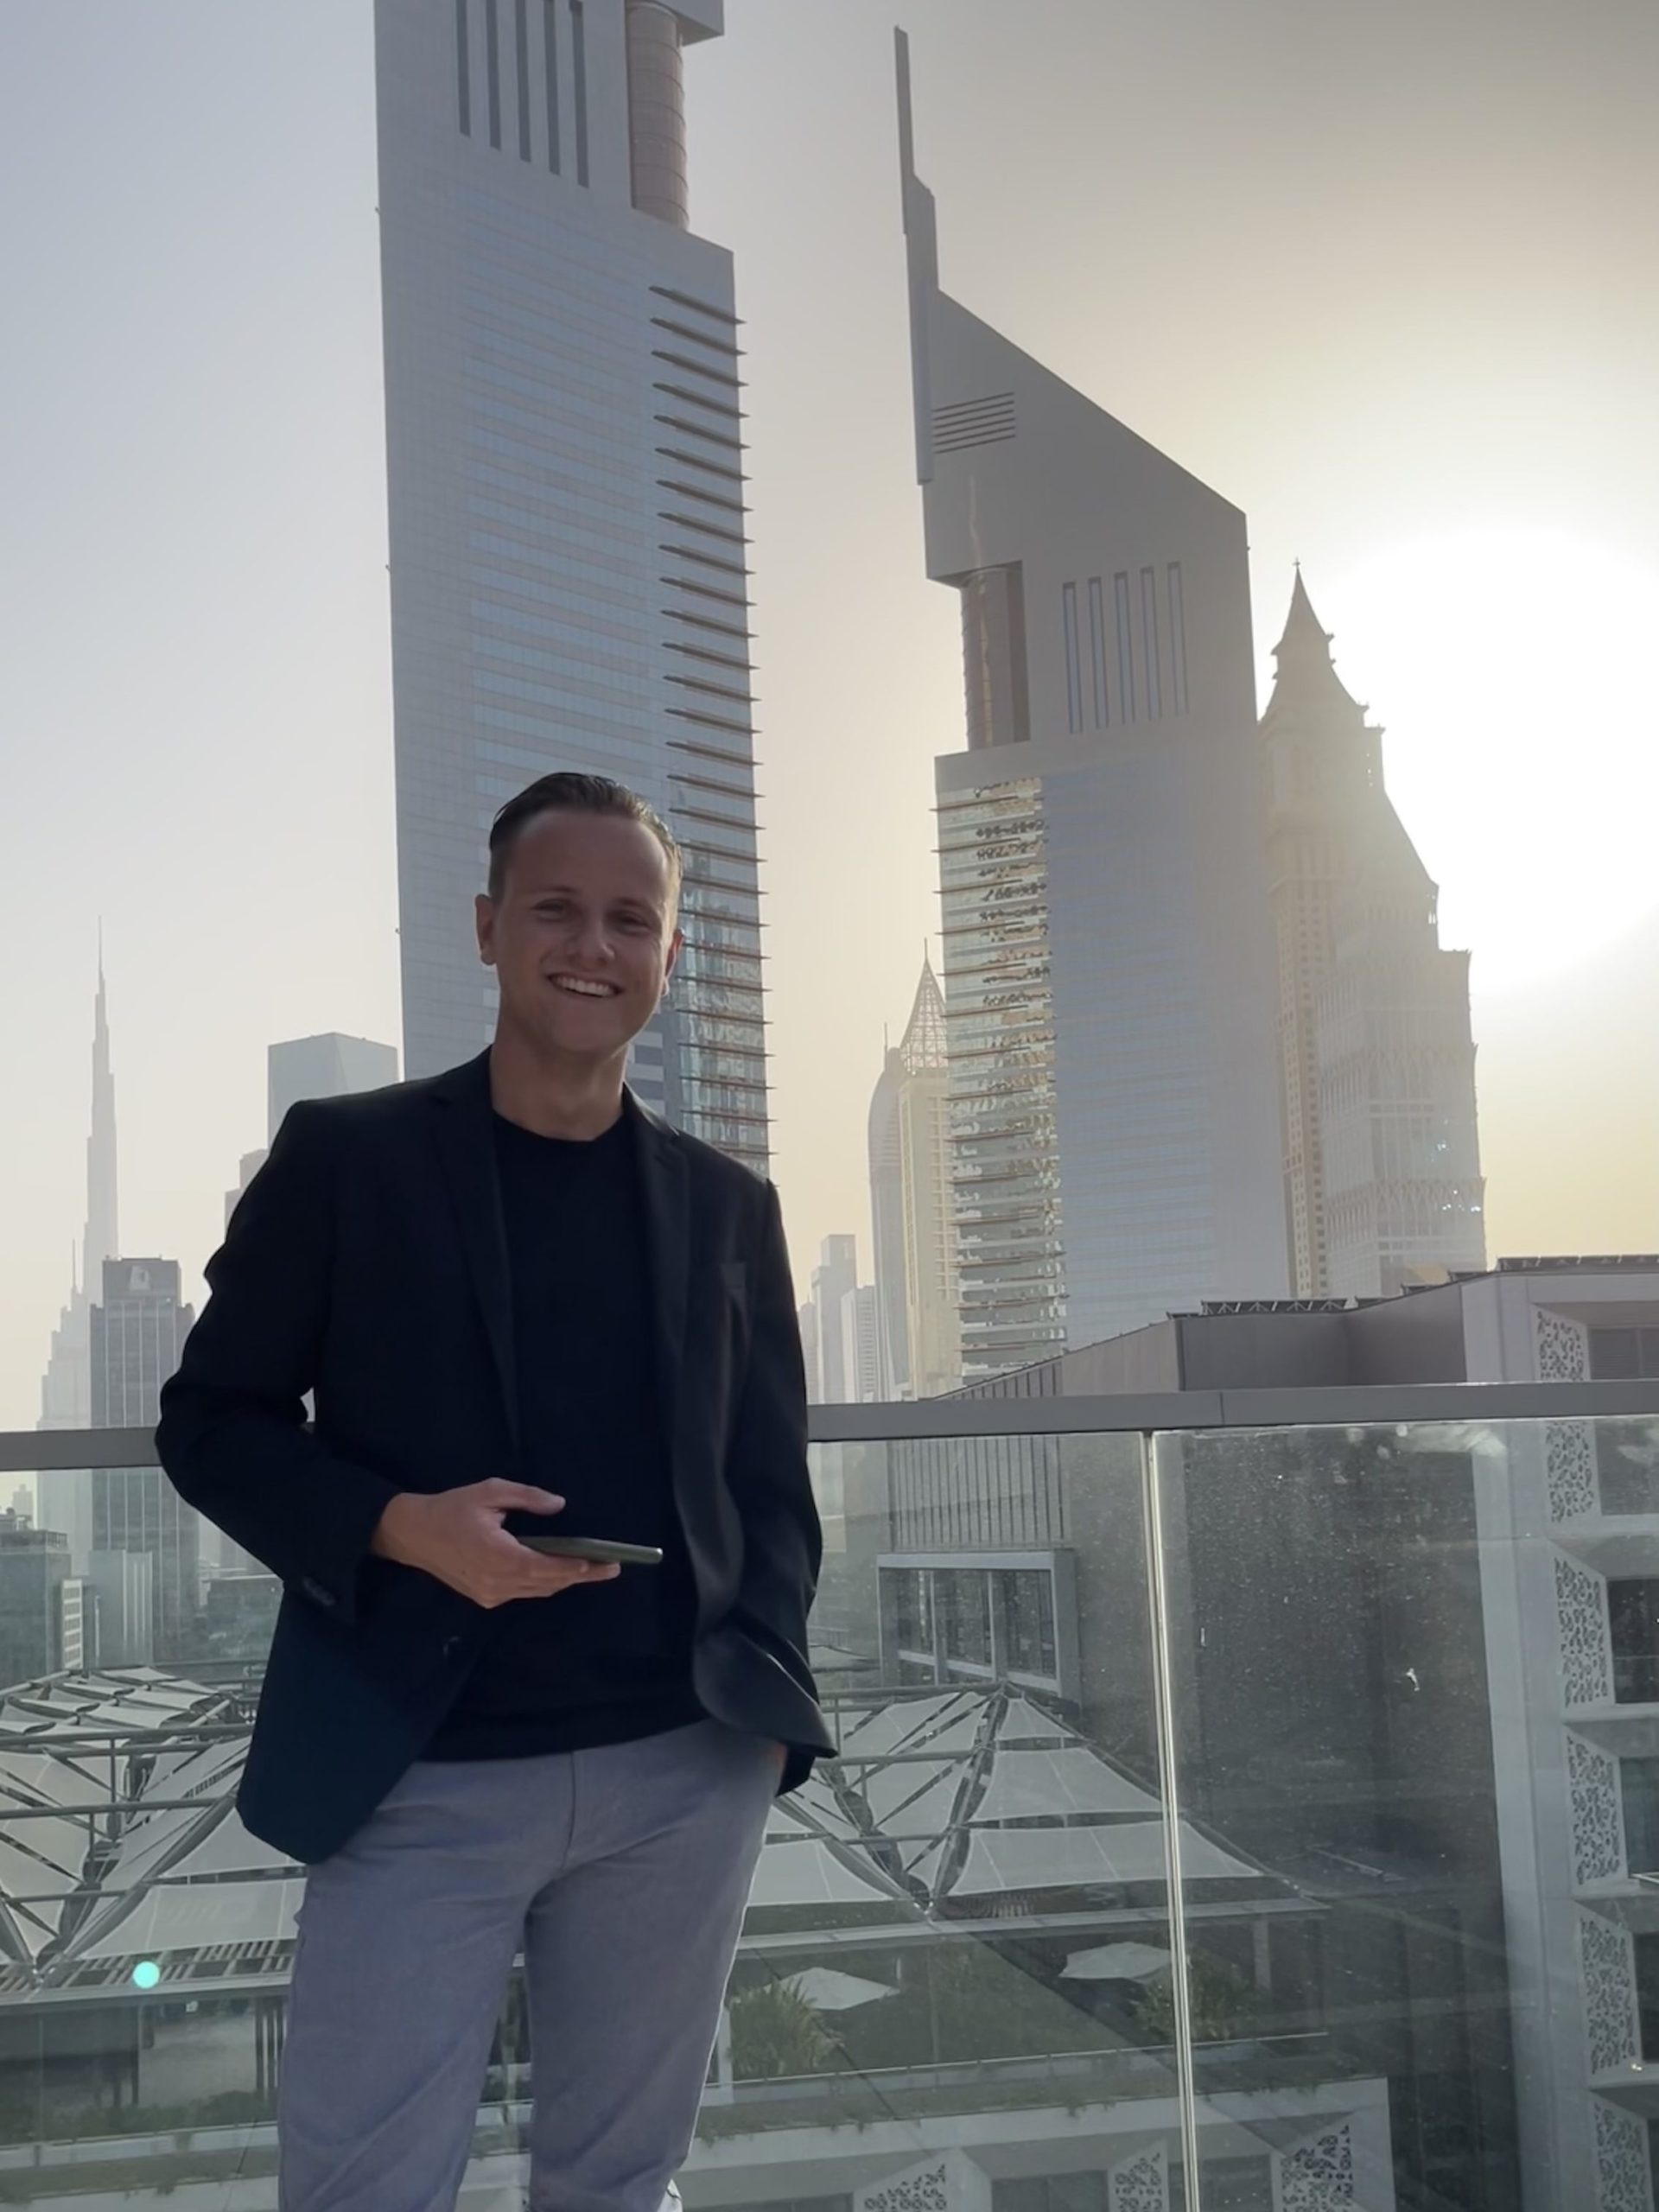 MBS student Elias Scholz in front of a Dubai skyline